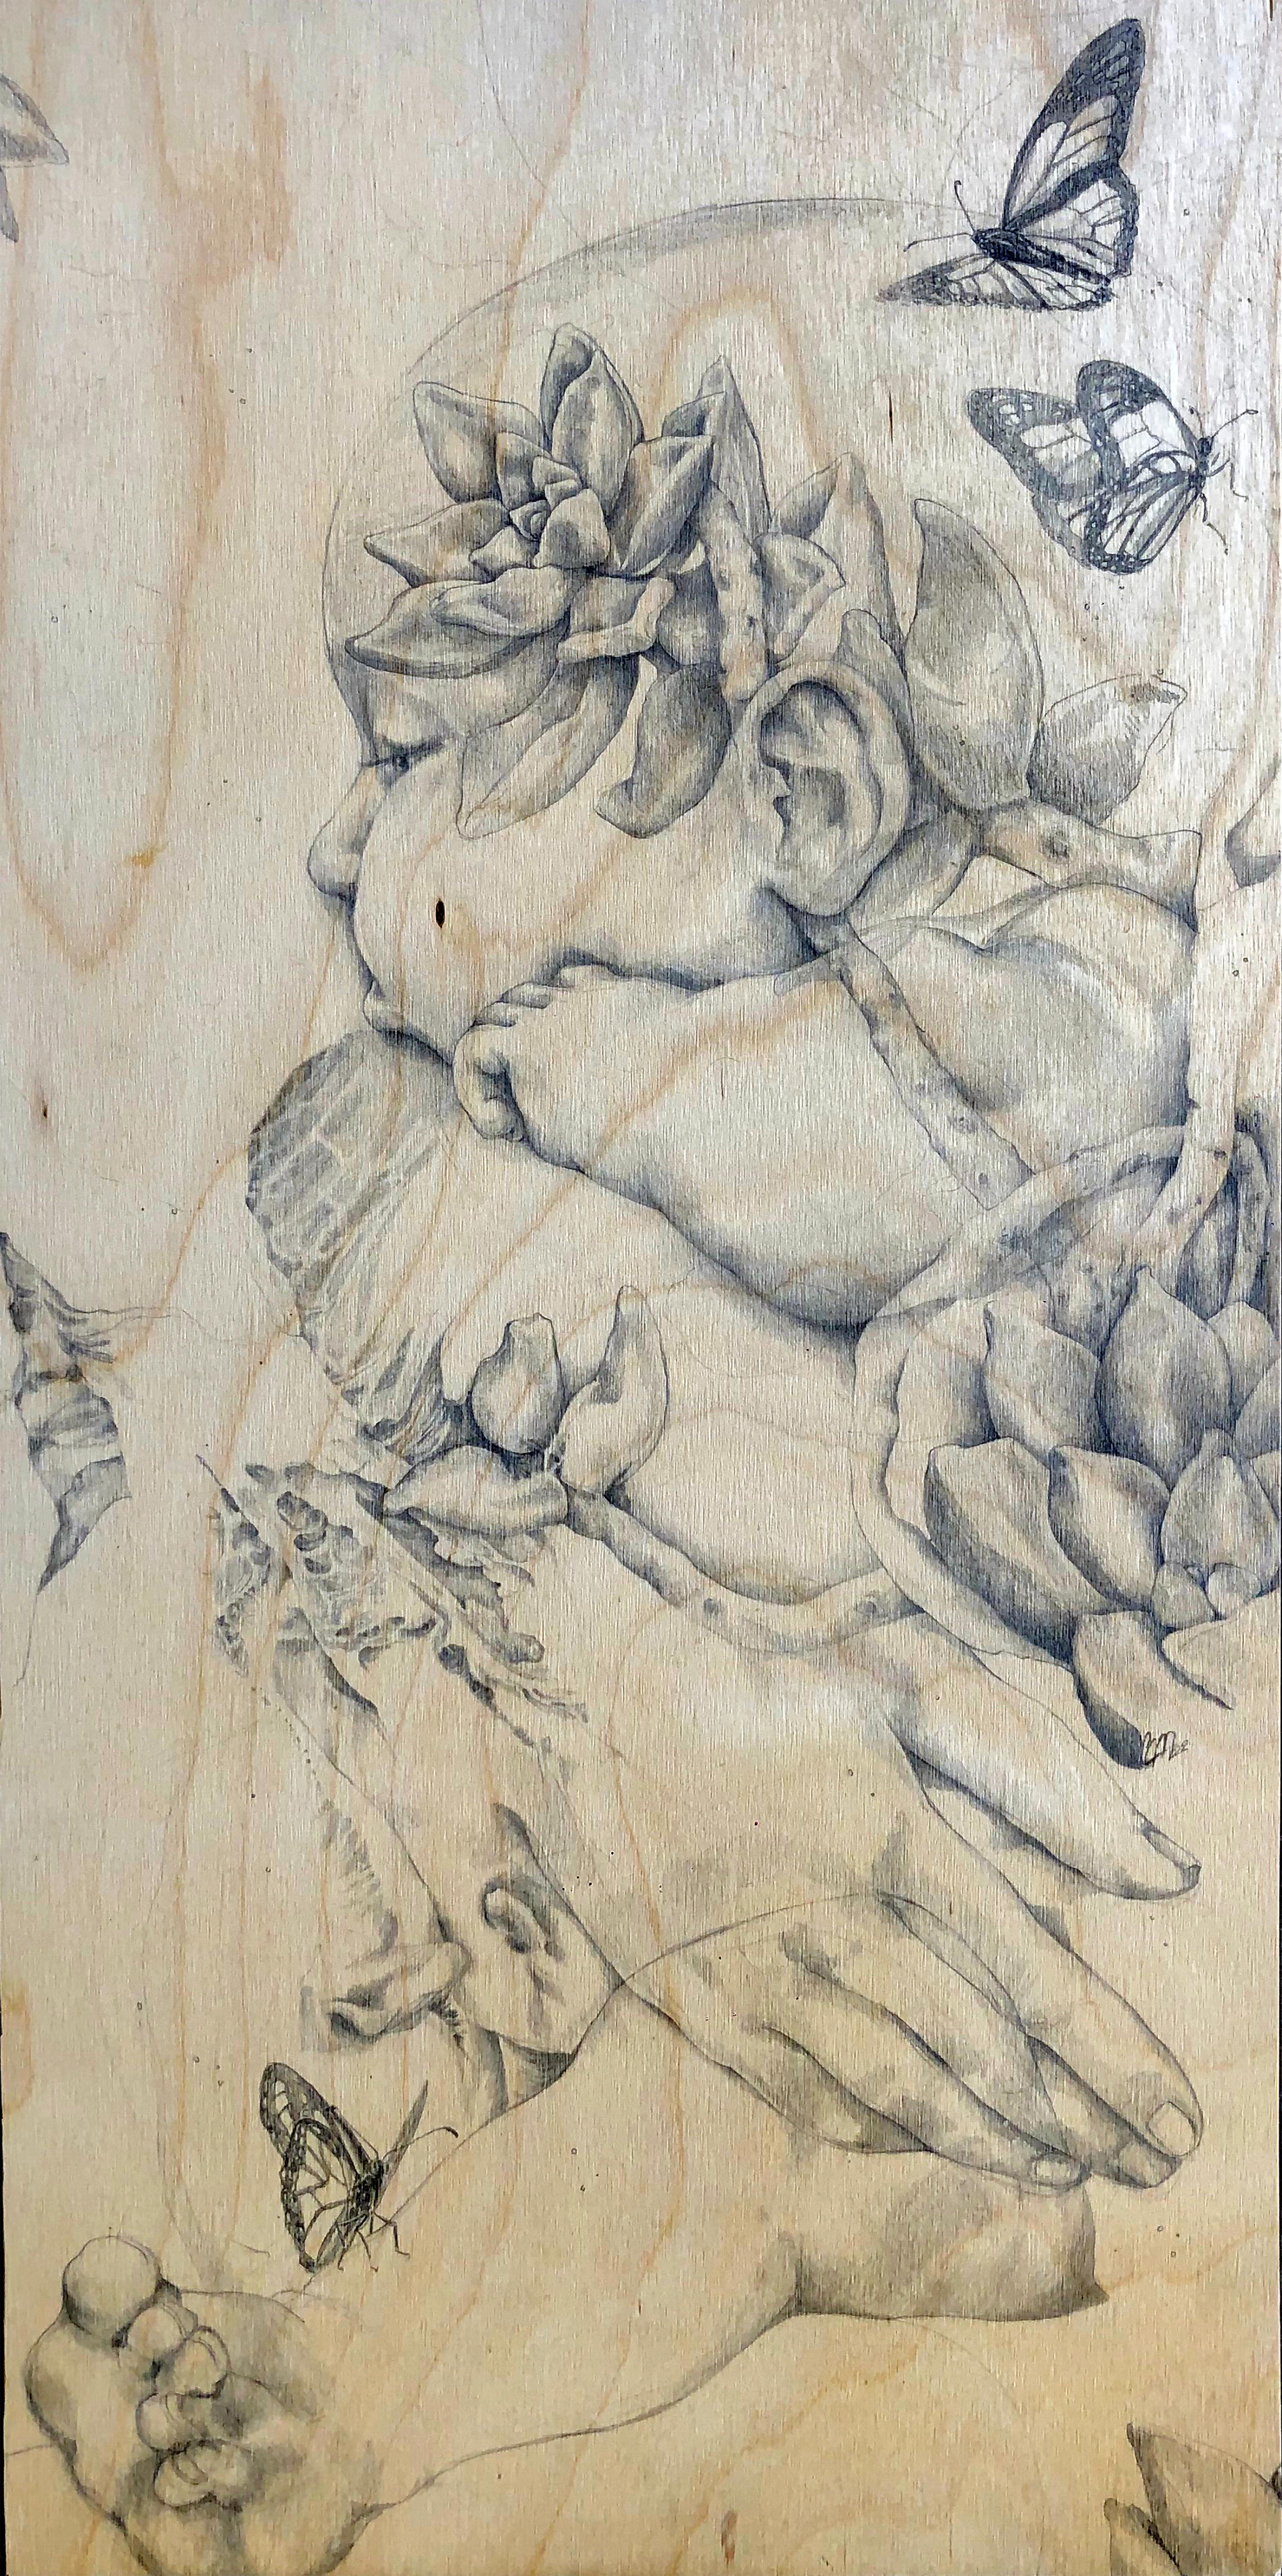 Charlene Mosley Figurative Art - Graphite Drawing on Wood Titled, "Aren't We All Made Of The Same Stardust?"